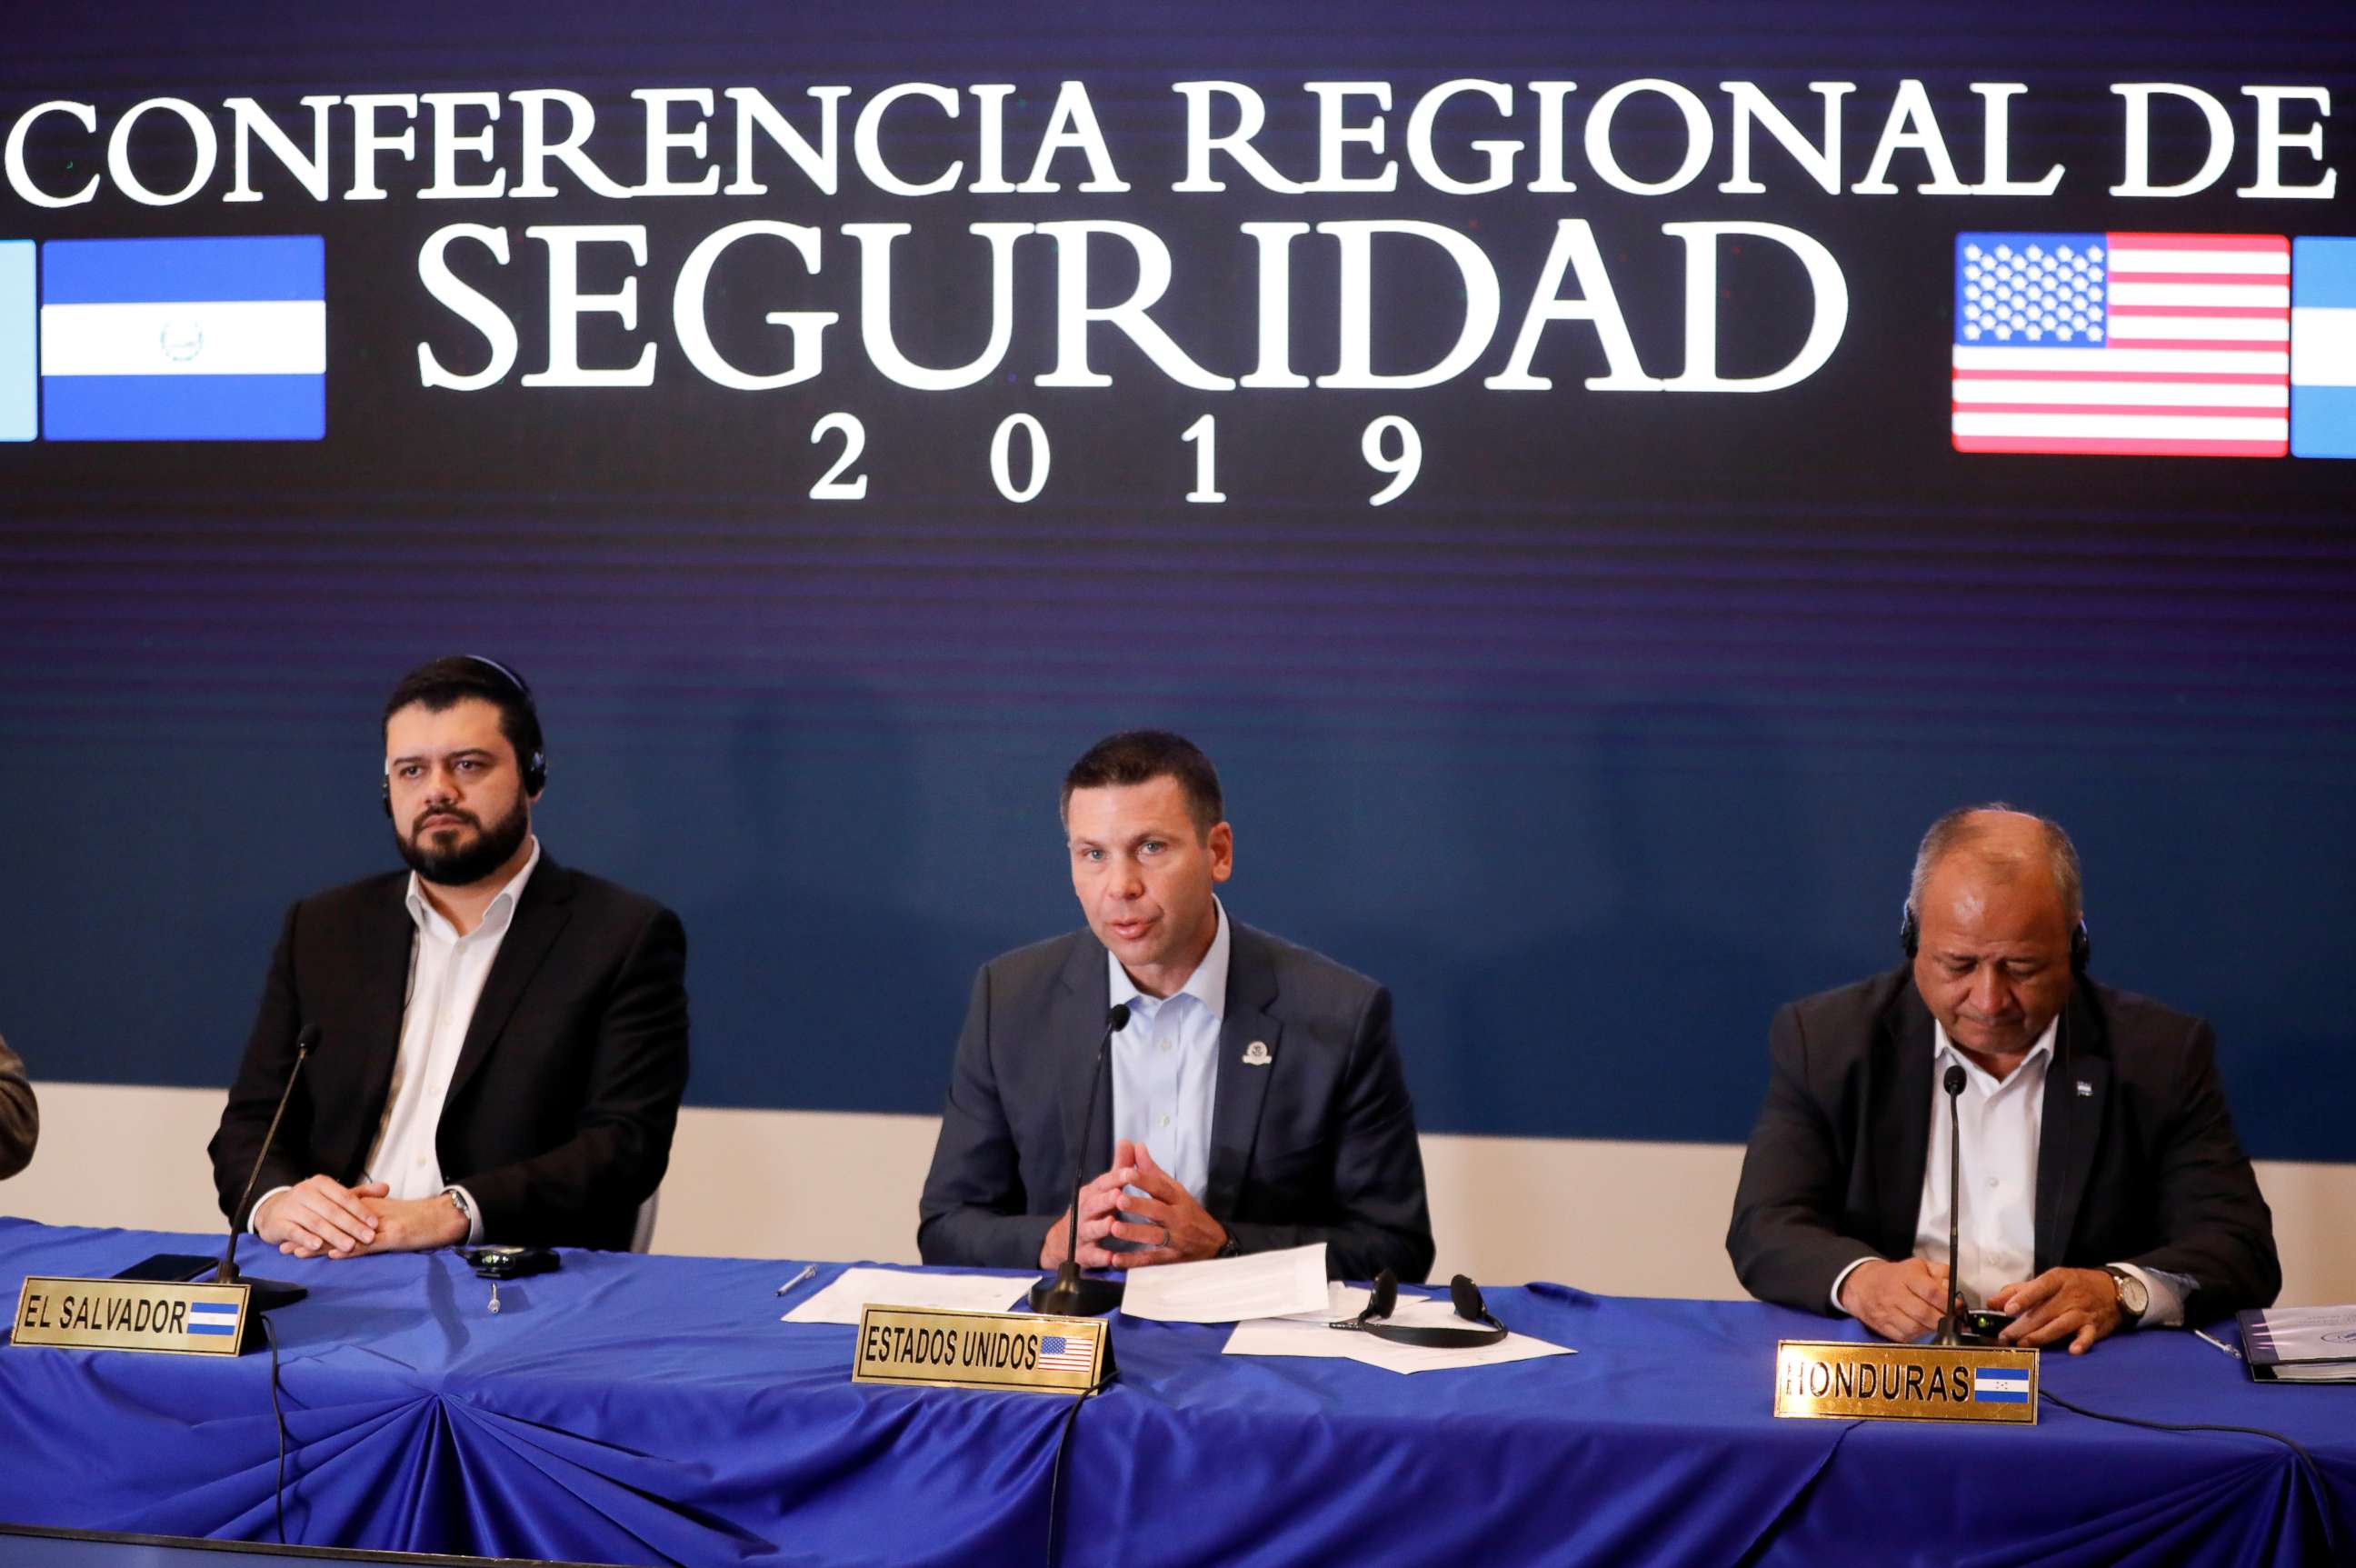 PHOTO: DHS Secretary Kevin McAleenan, El Salvador's Minister of Security Rogelio Rivas, and Honduran Minister of Security Julian Pacheco attend a news conference.